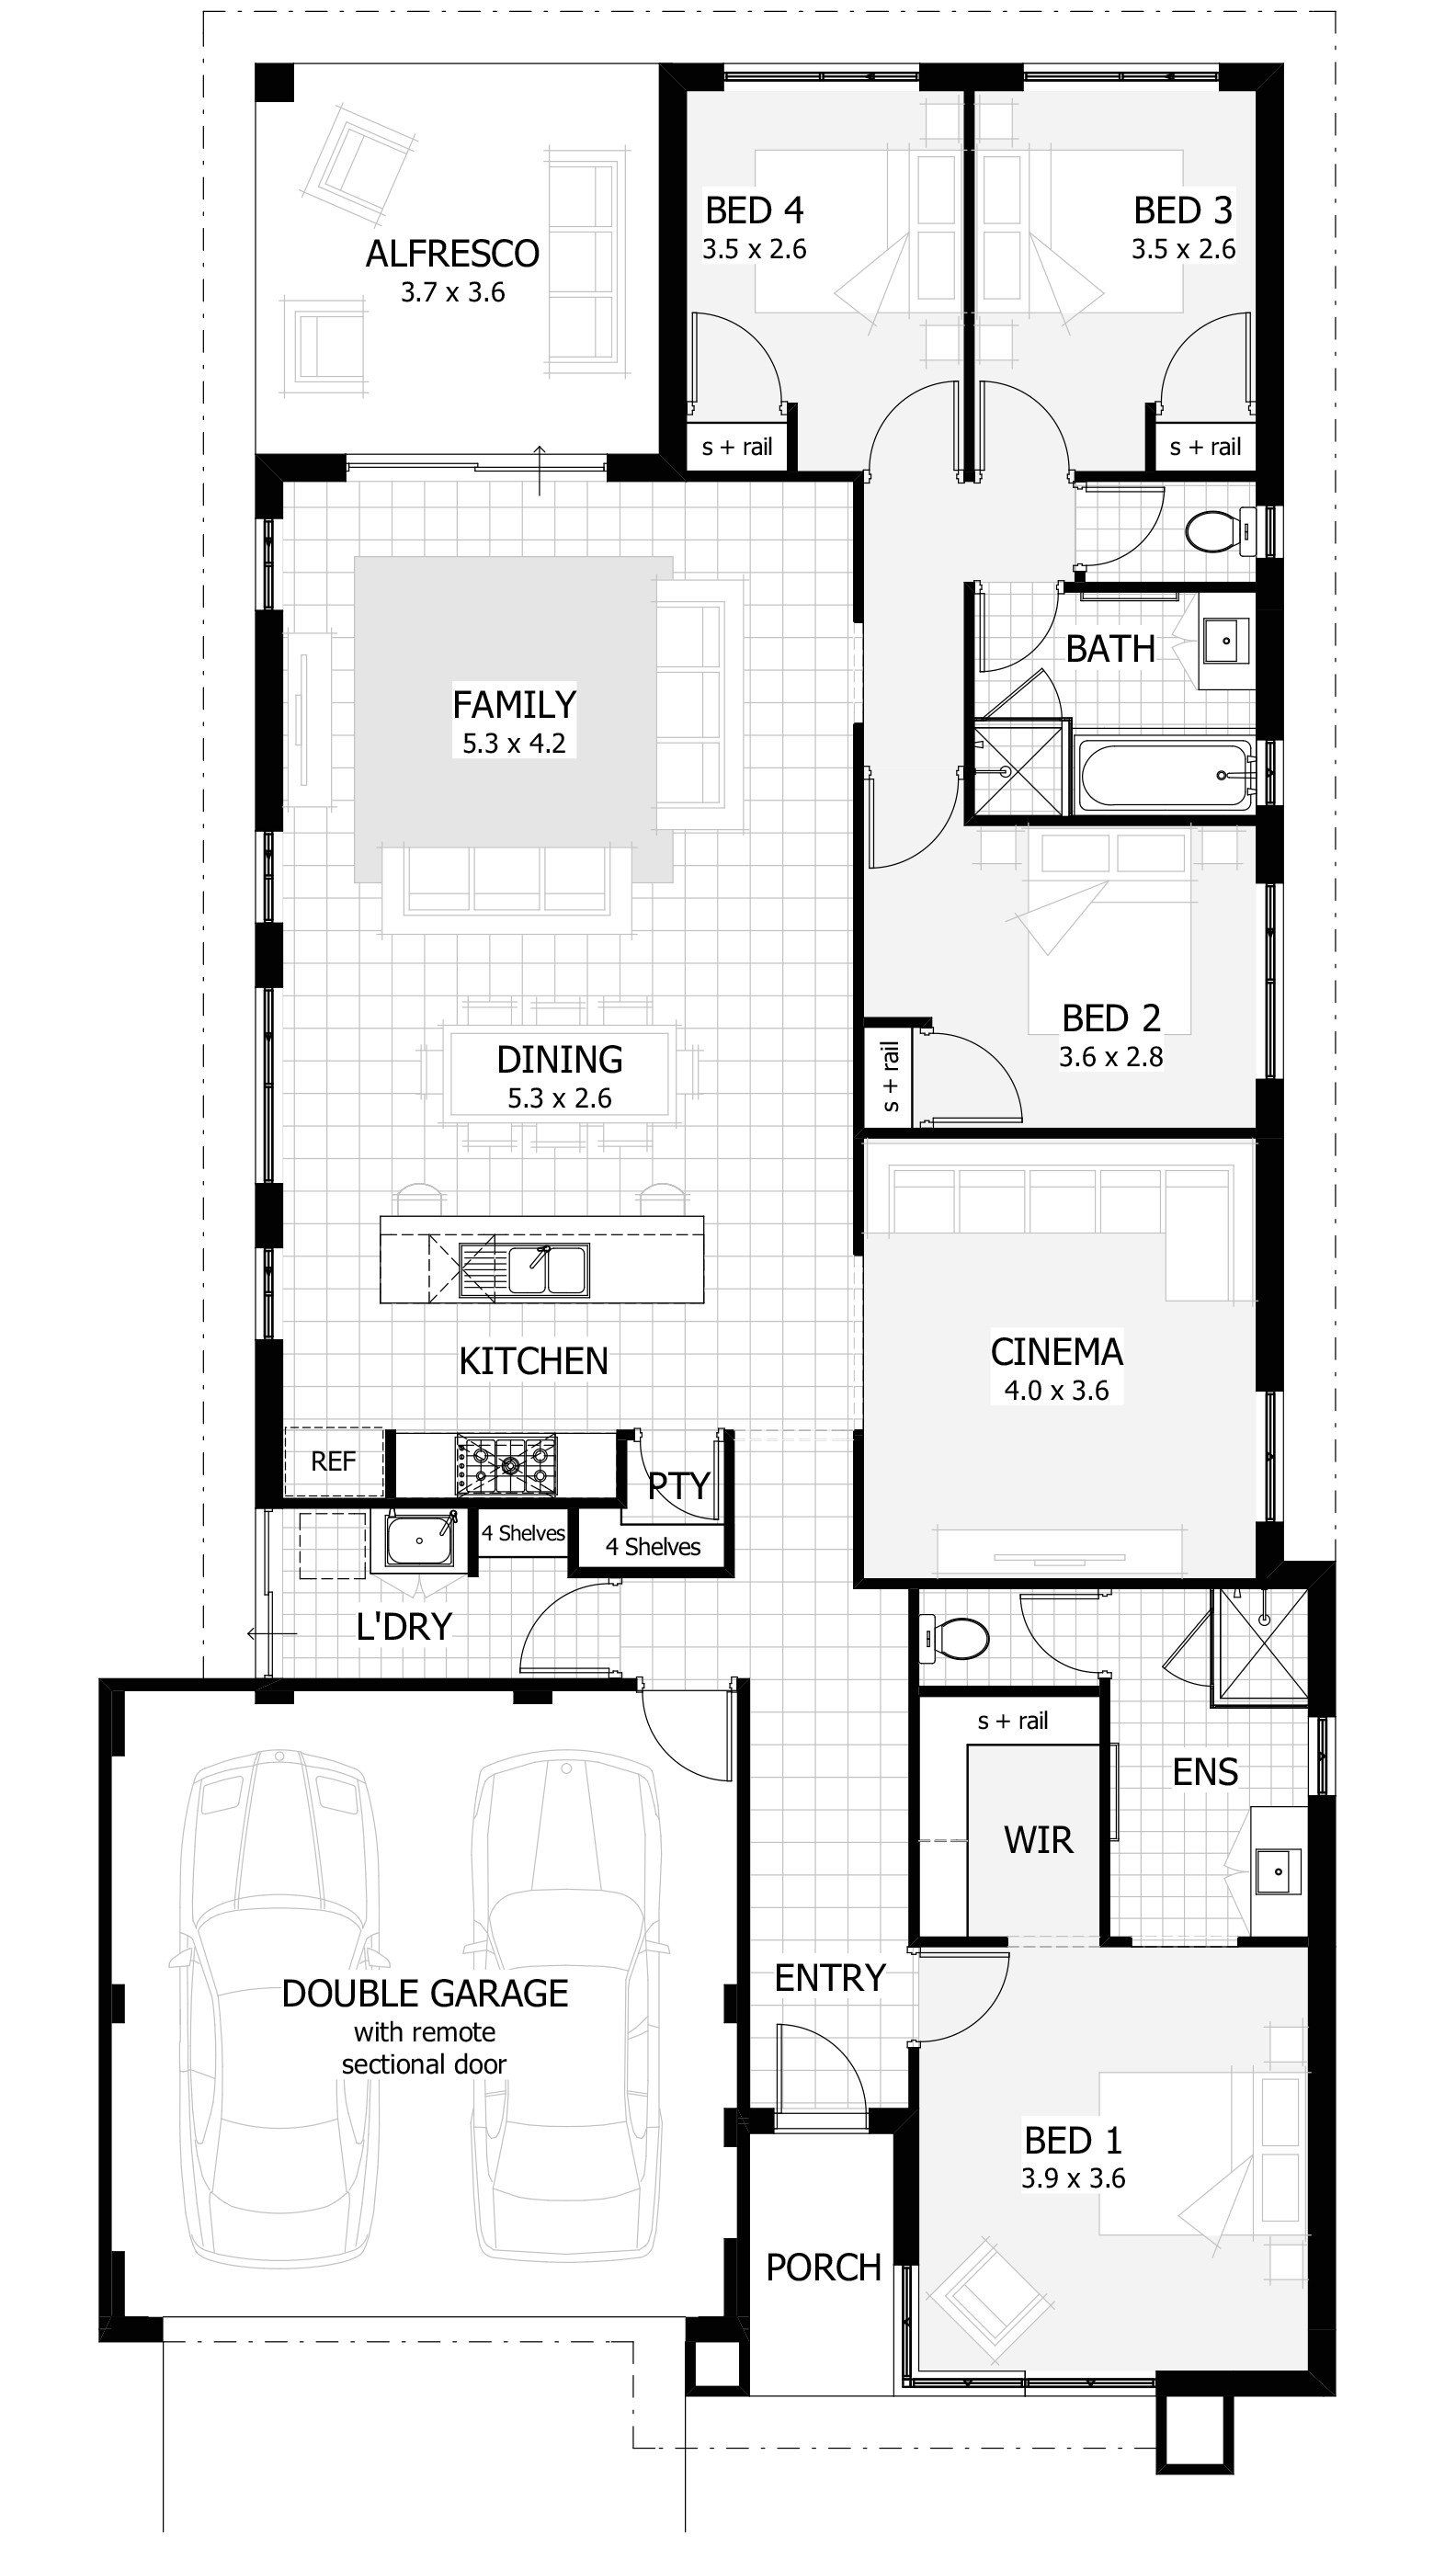 Home Floor Plans Australia Alluring Wa Home Designs Of Ideas House Plans Western